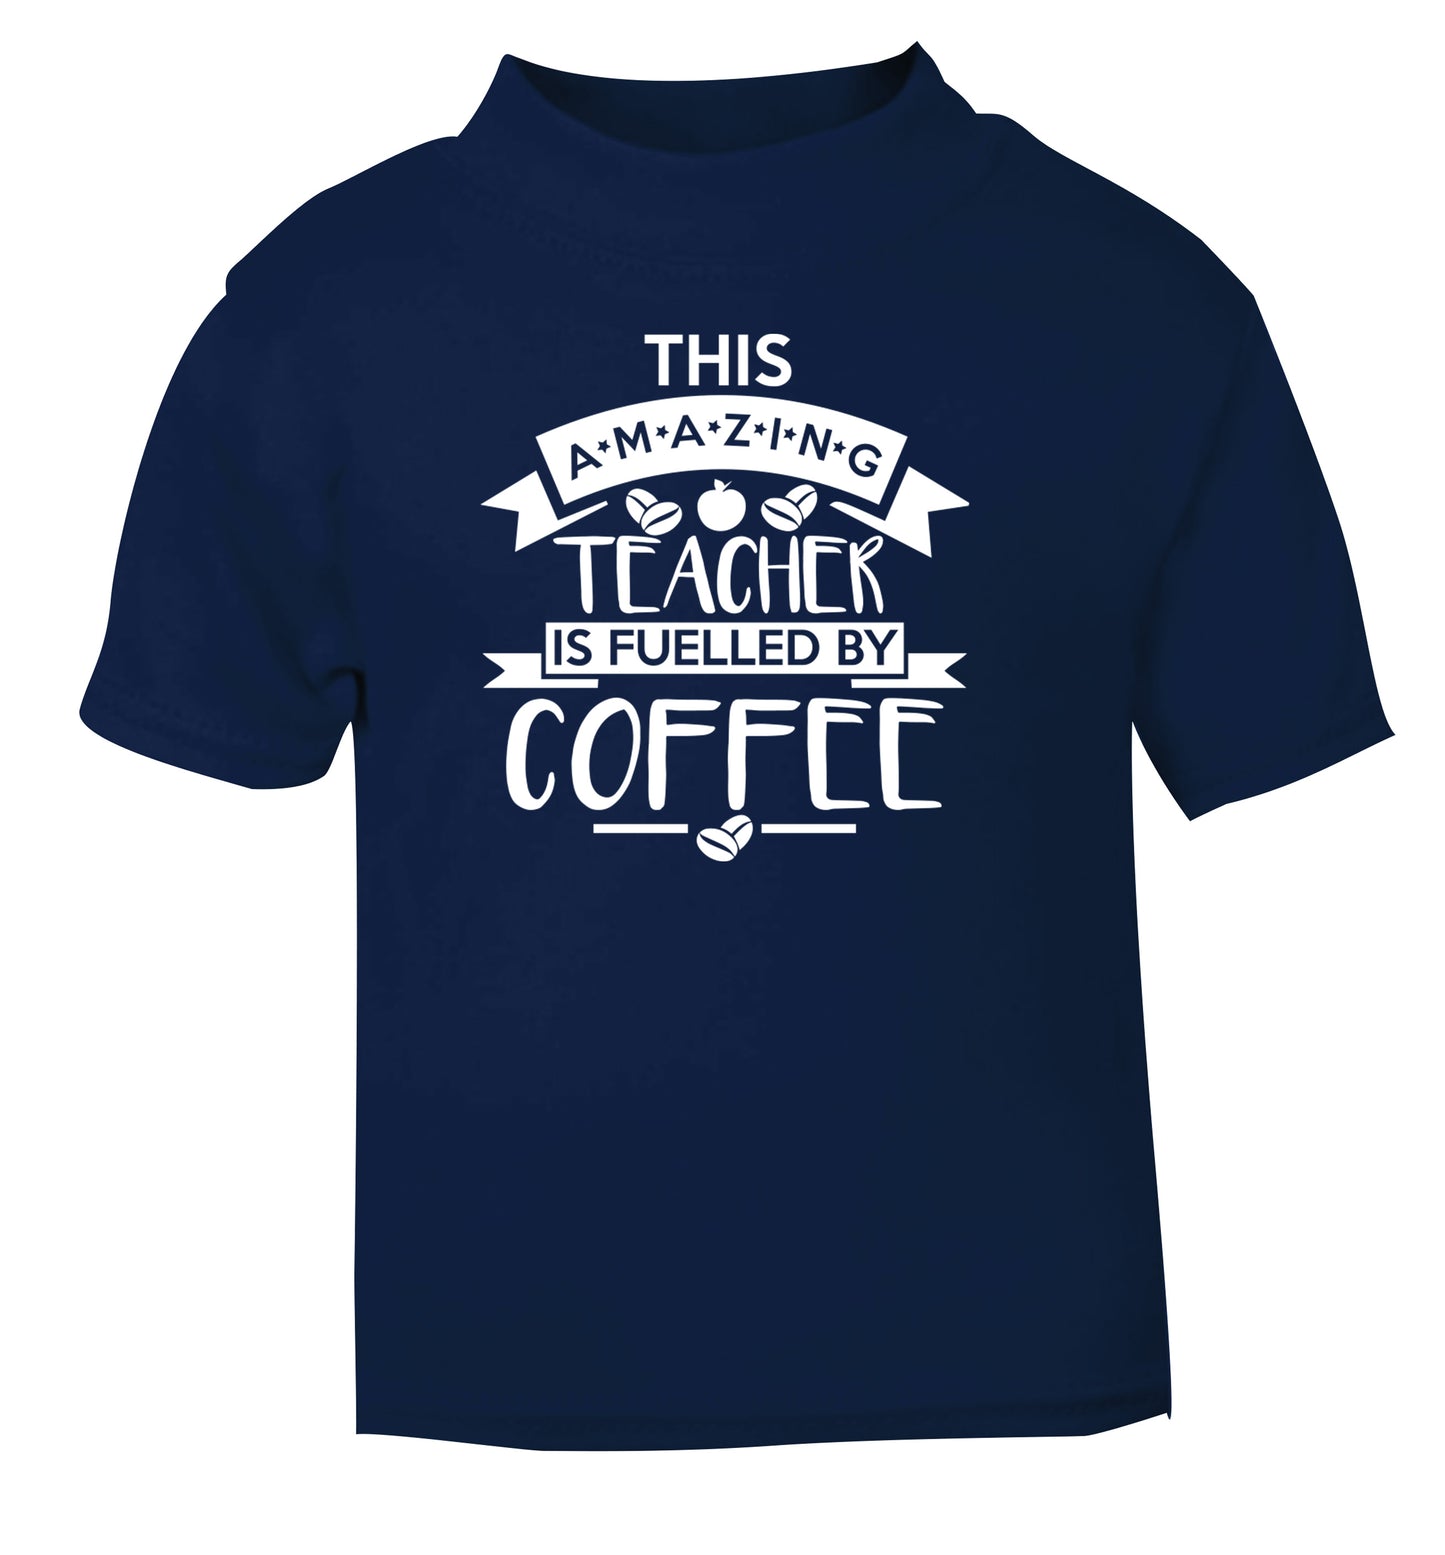 This amazing teacher is fuelled by coffee navy Baby Toddler Tshirt 2 Years